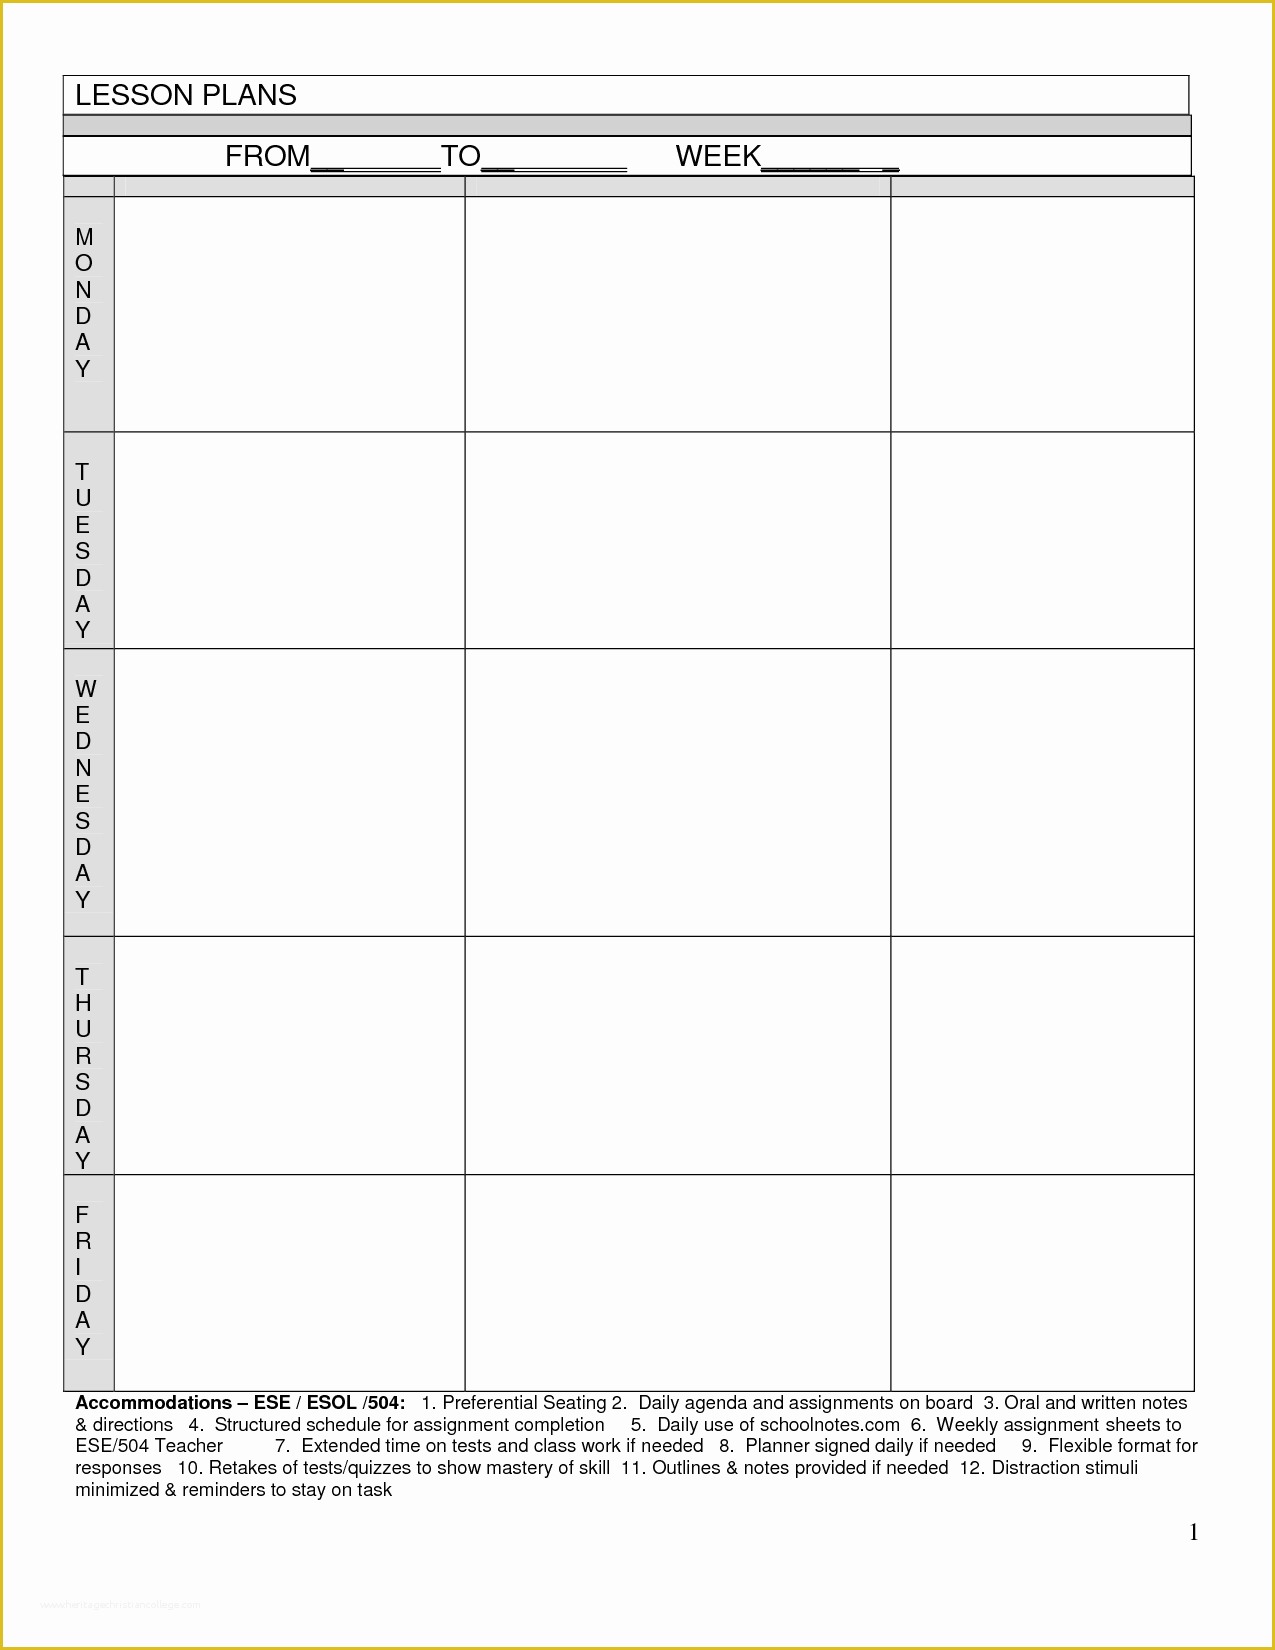 Free Lesson Plan Templates Of Blank Lesson Plans for Teachers